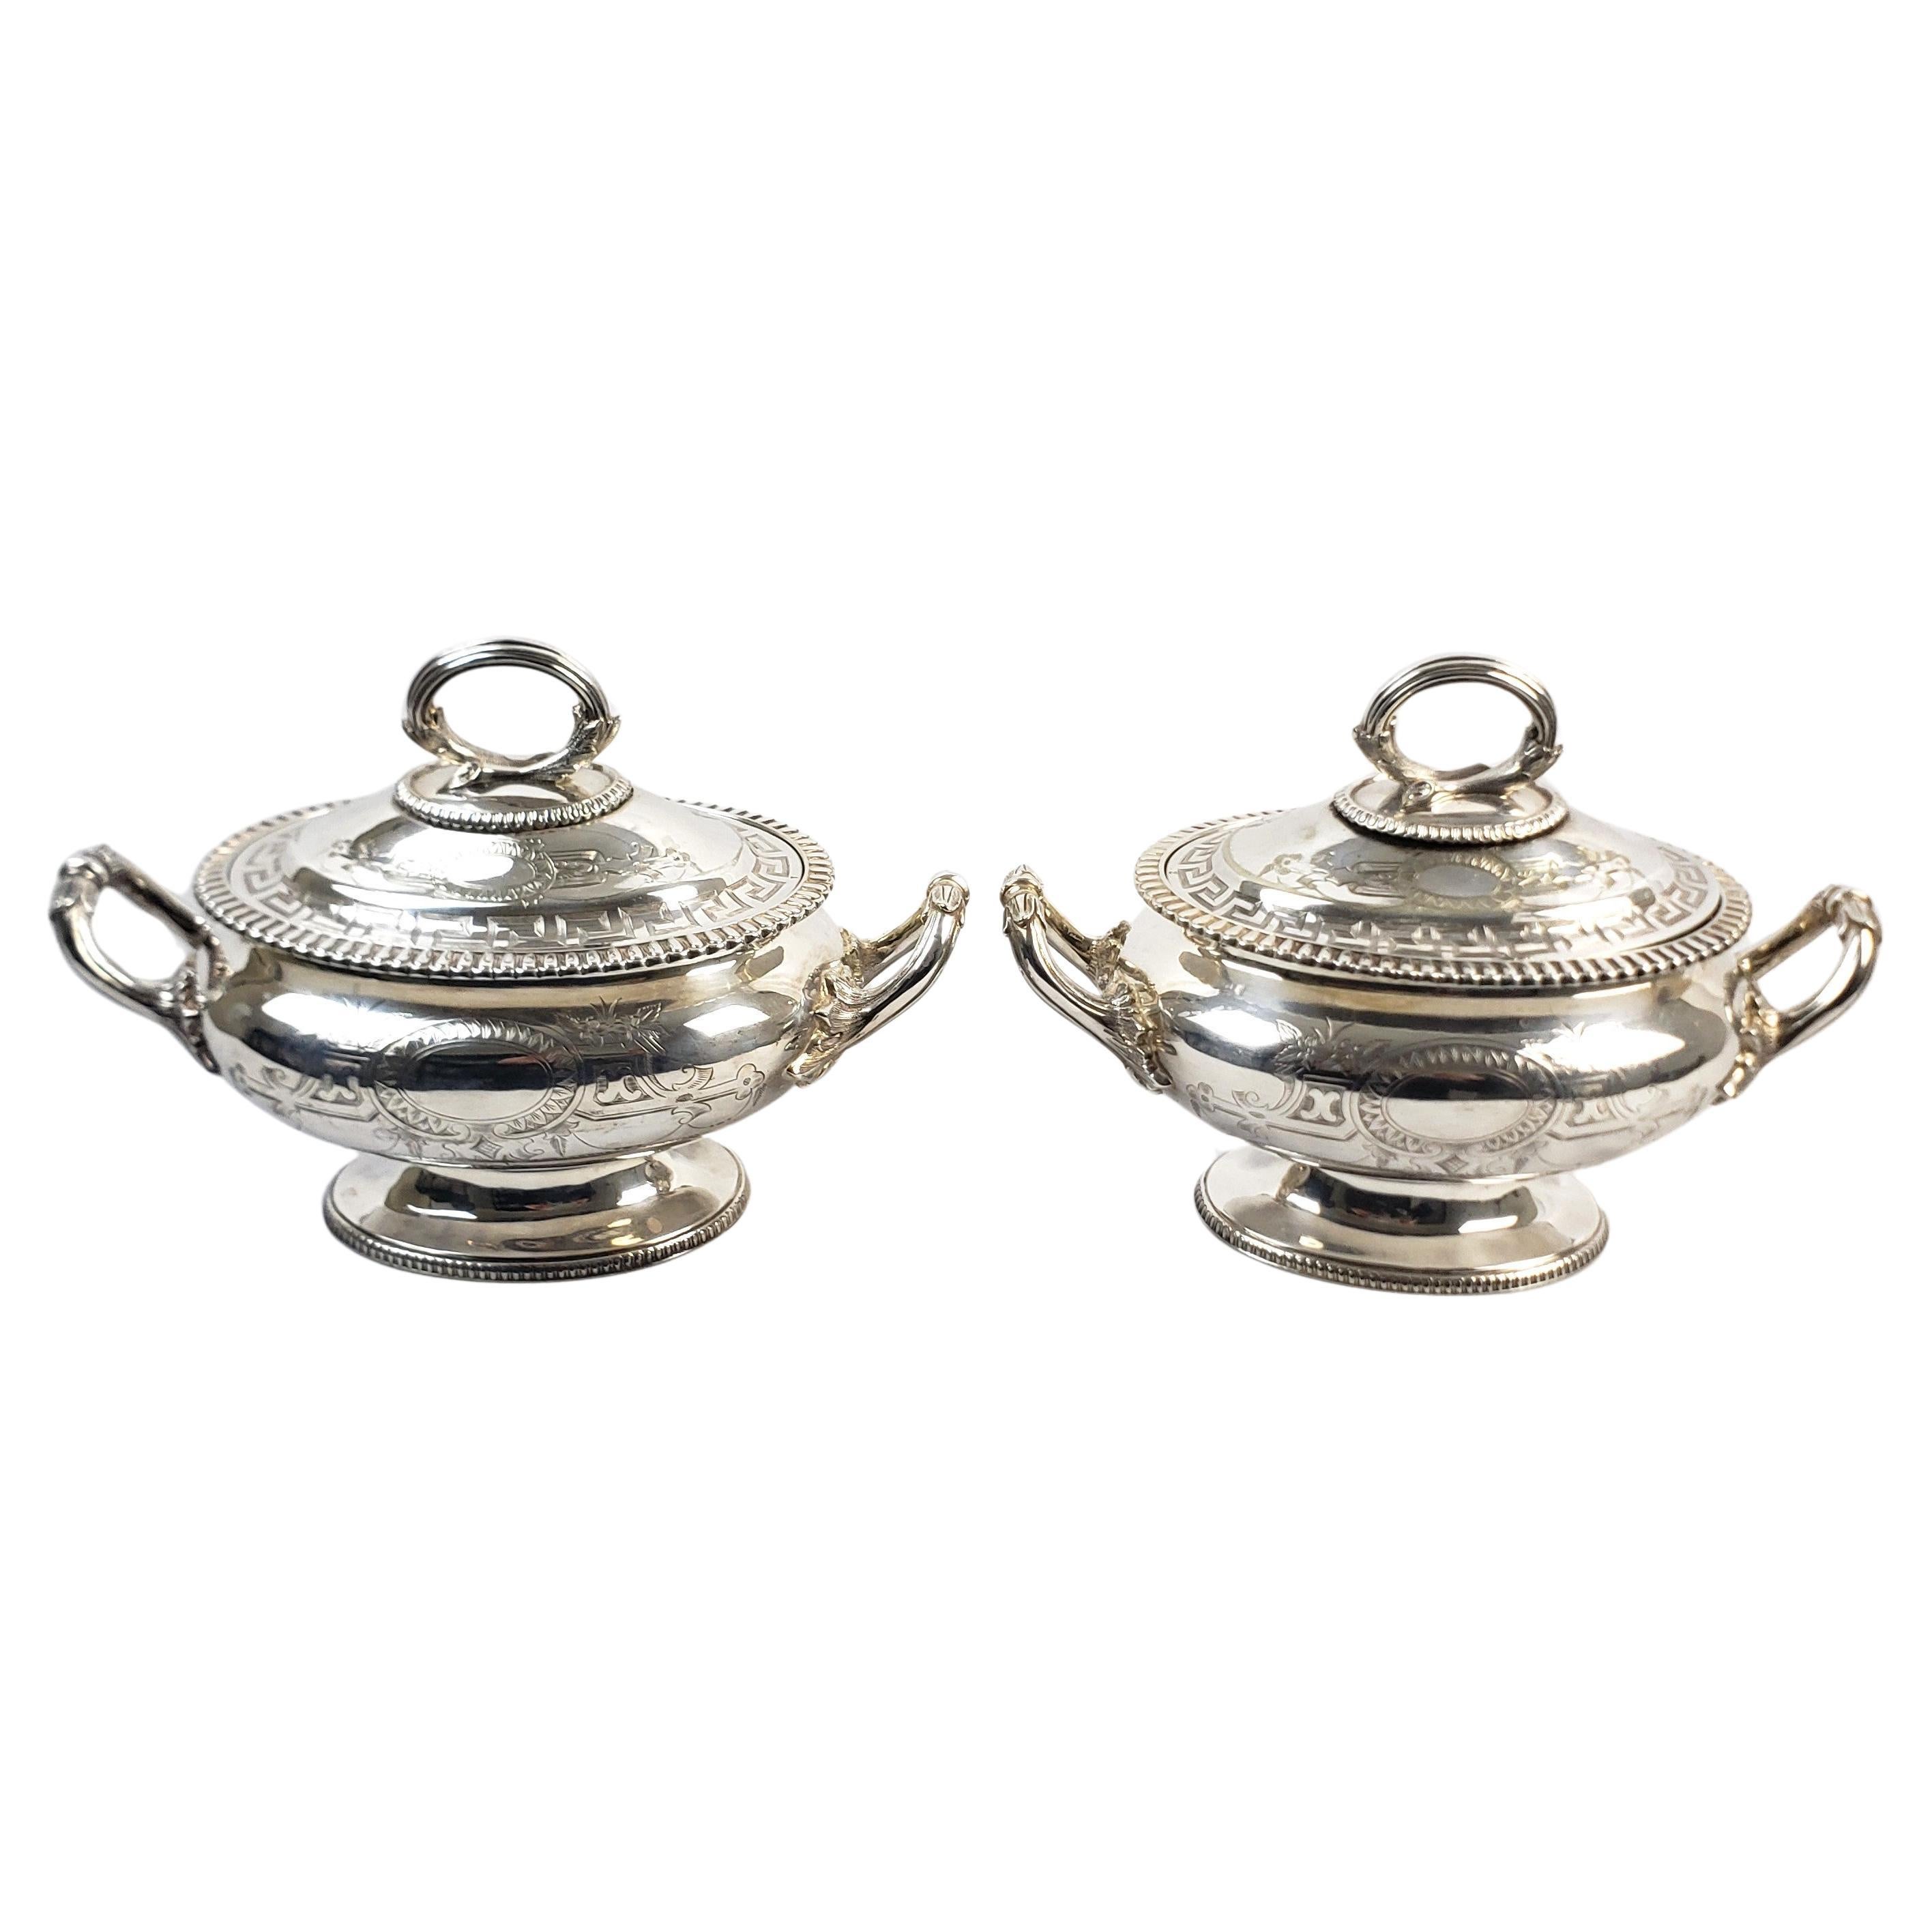 Pair of Antique English Silver Plated Covered Sauce Tureens